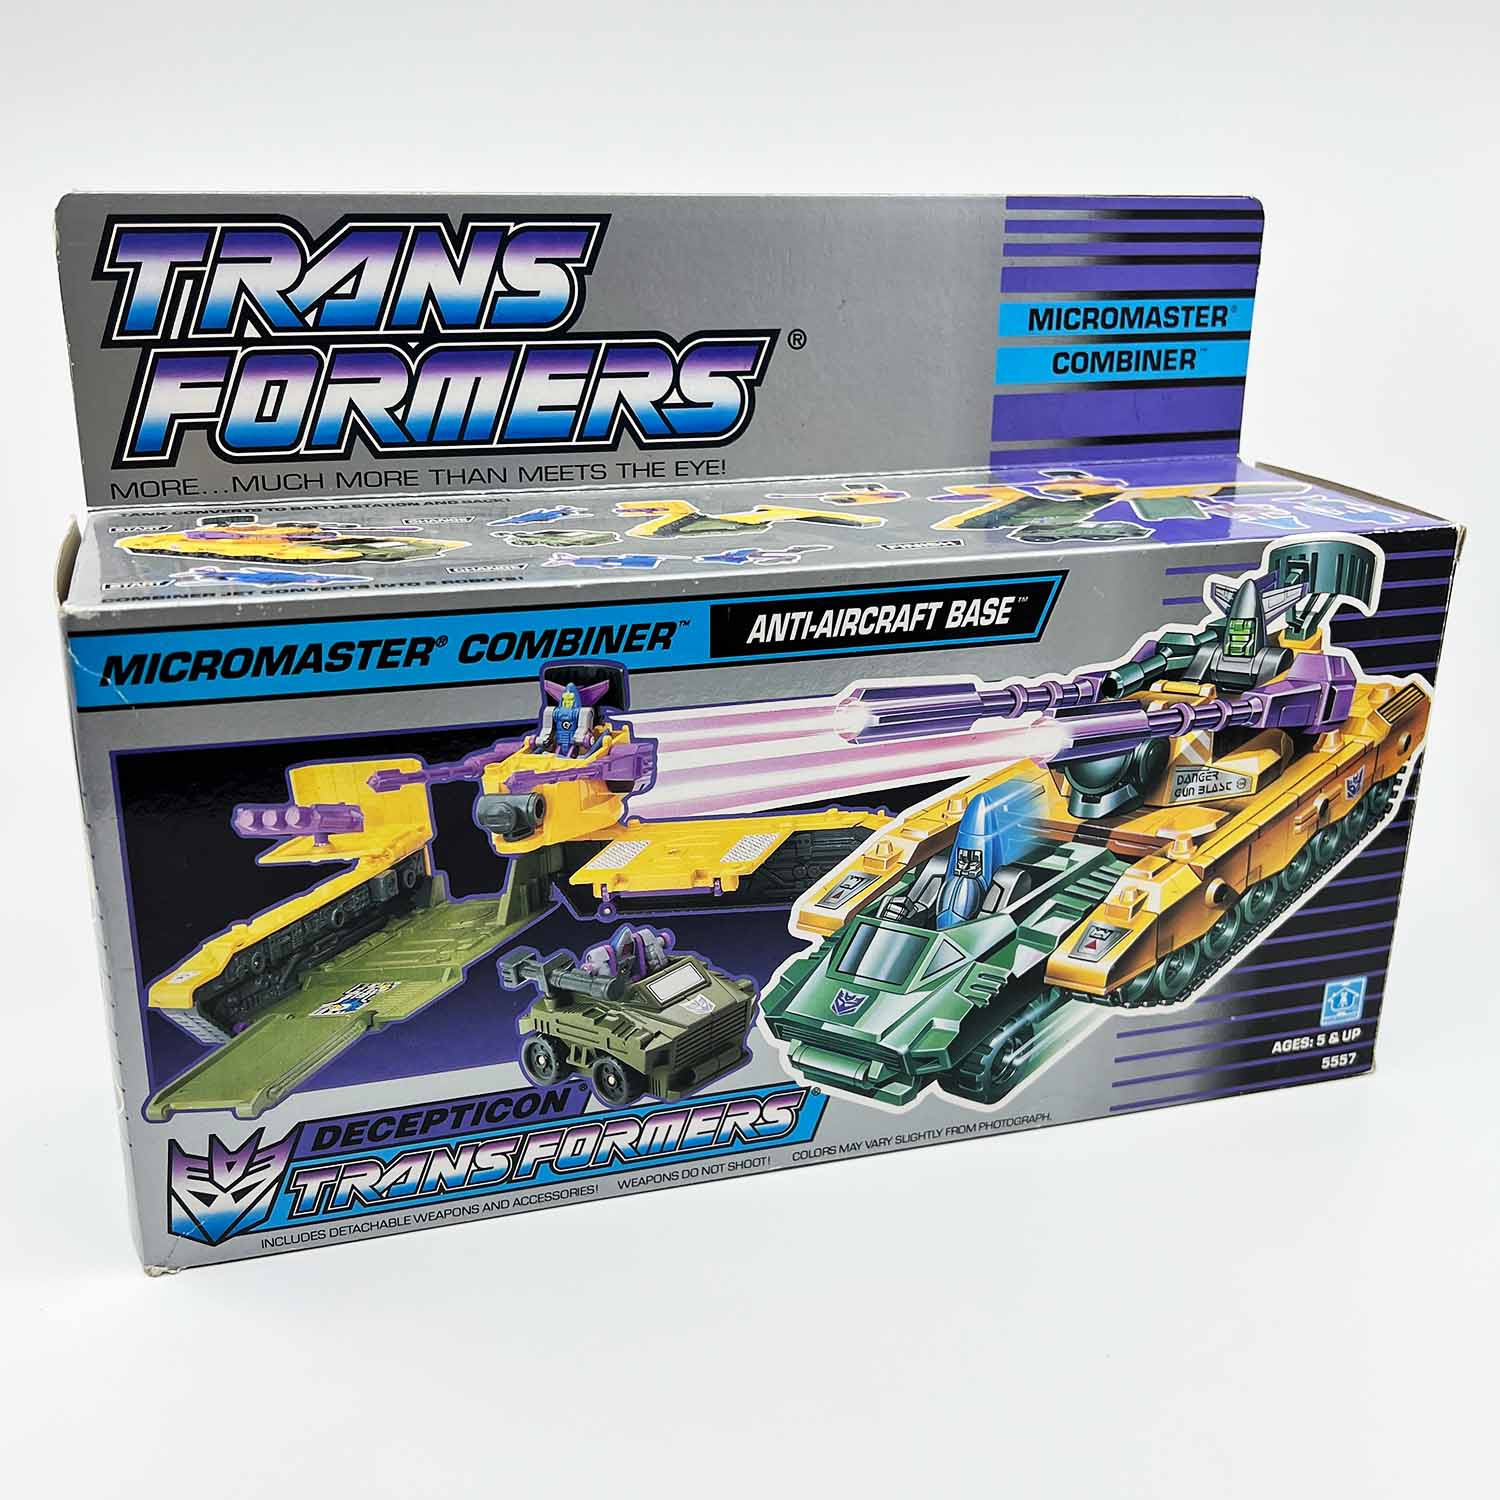 Micromaster Combiner Anti-Aircraft Base Decepticon Transformers G1 1989 with Box